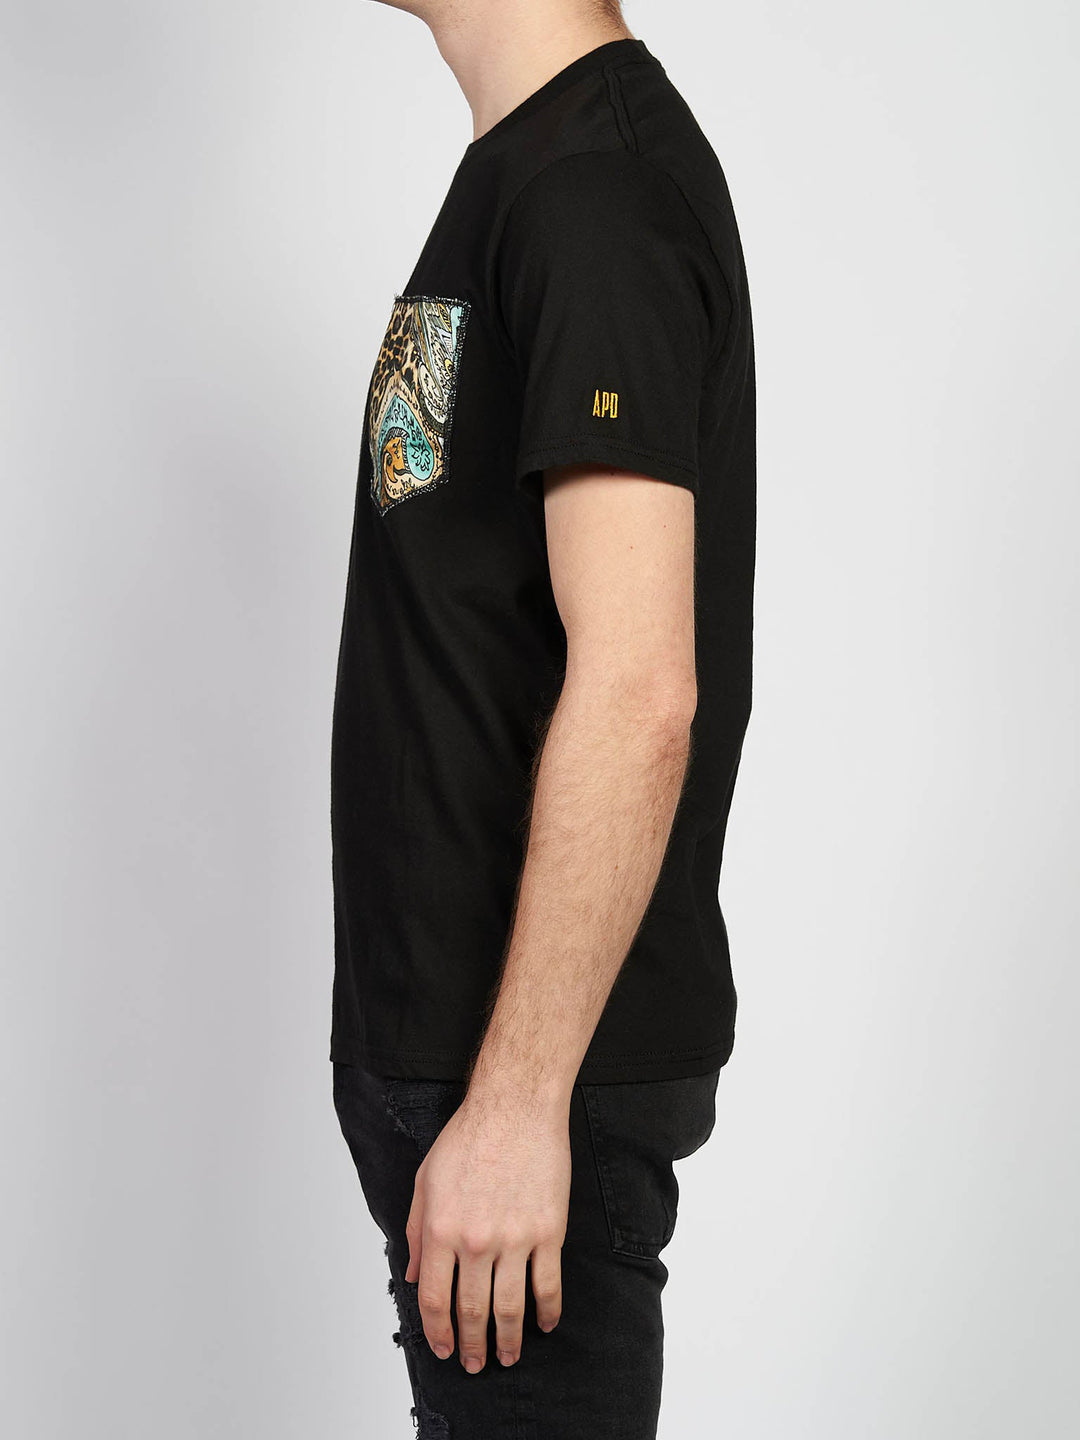 Tee Shirt with Leopard/Paisley Pocket in Black (25% OFF)